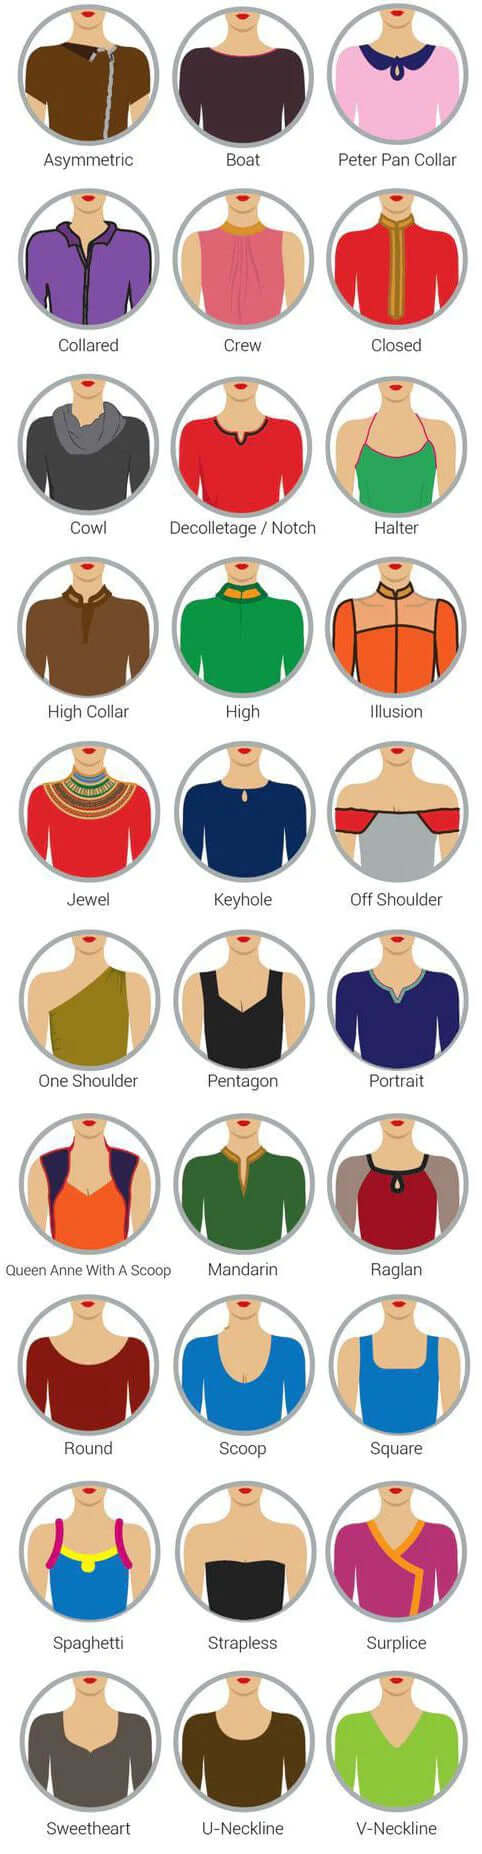 Necklines - the complete illustrated fashion guide to women's clothing